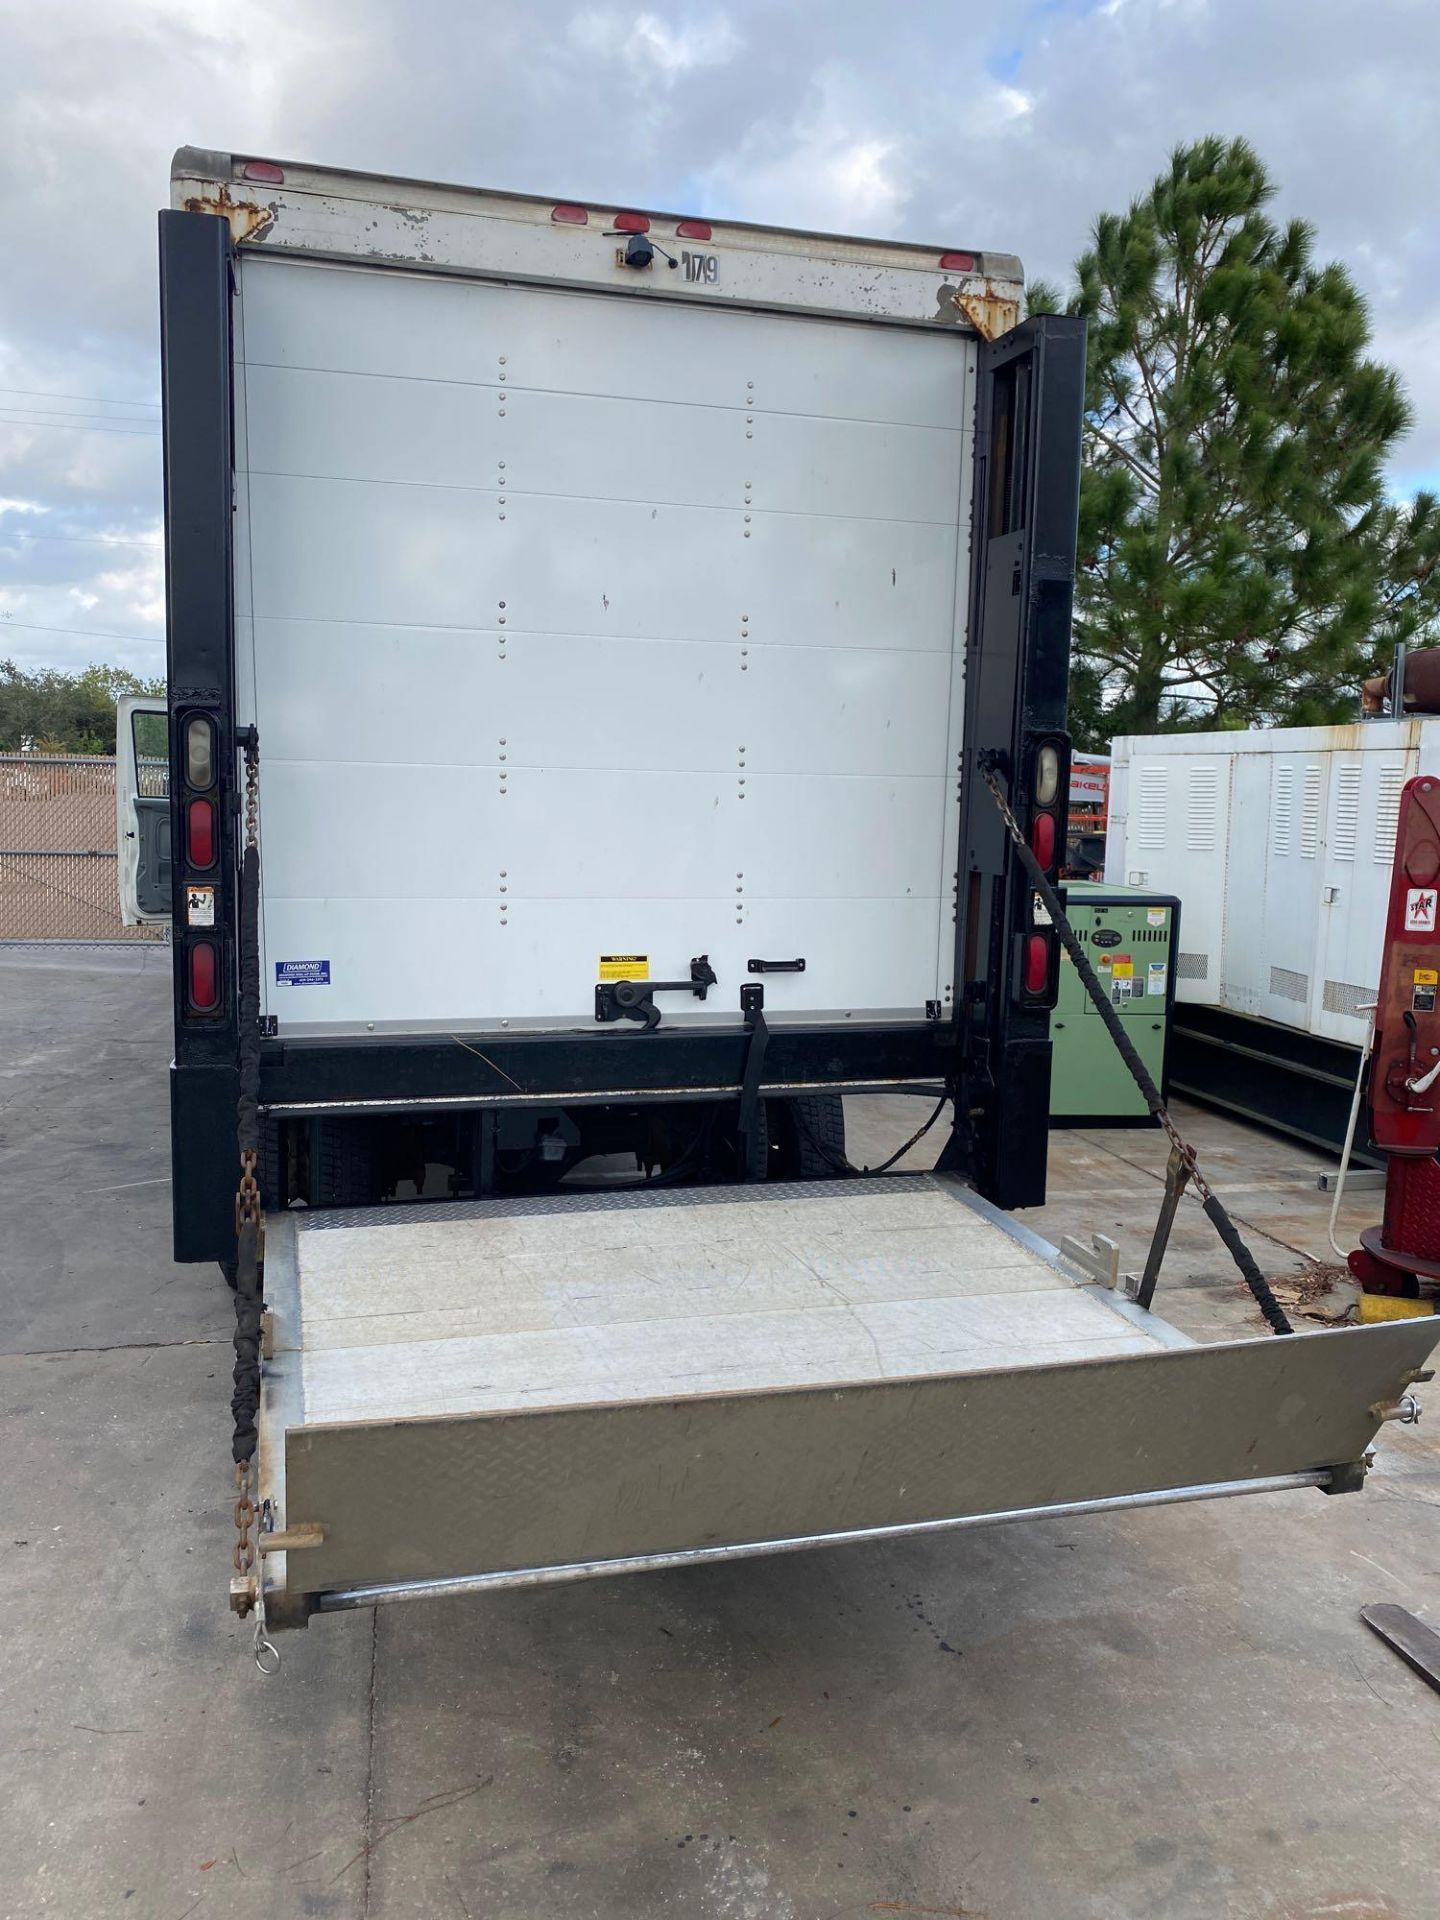 IH4300 BOX TRUCK, 16' X 8' BED, 4,000 LB CAPACITY LIFT GATE, NEWER ROLL UP BACK DOOR - Image 19 of 24